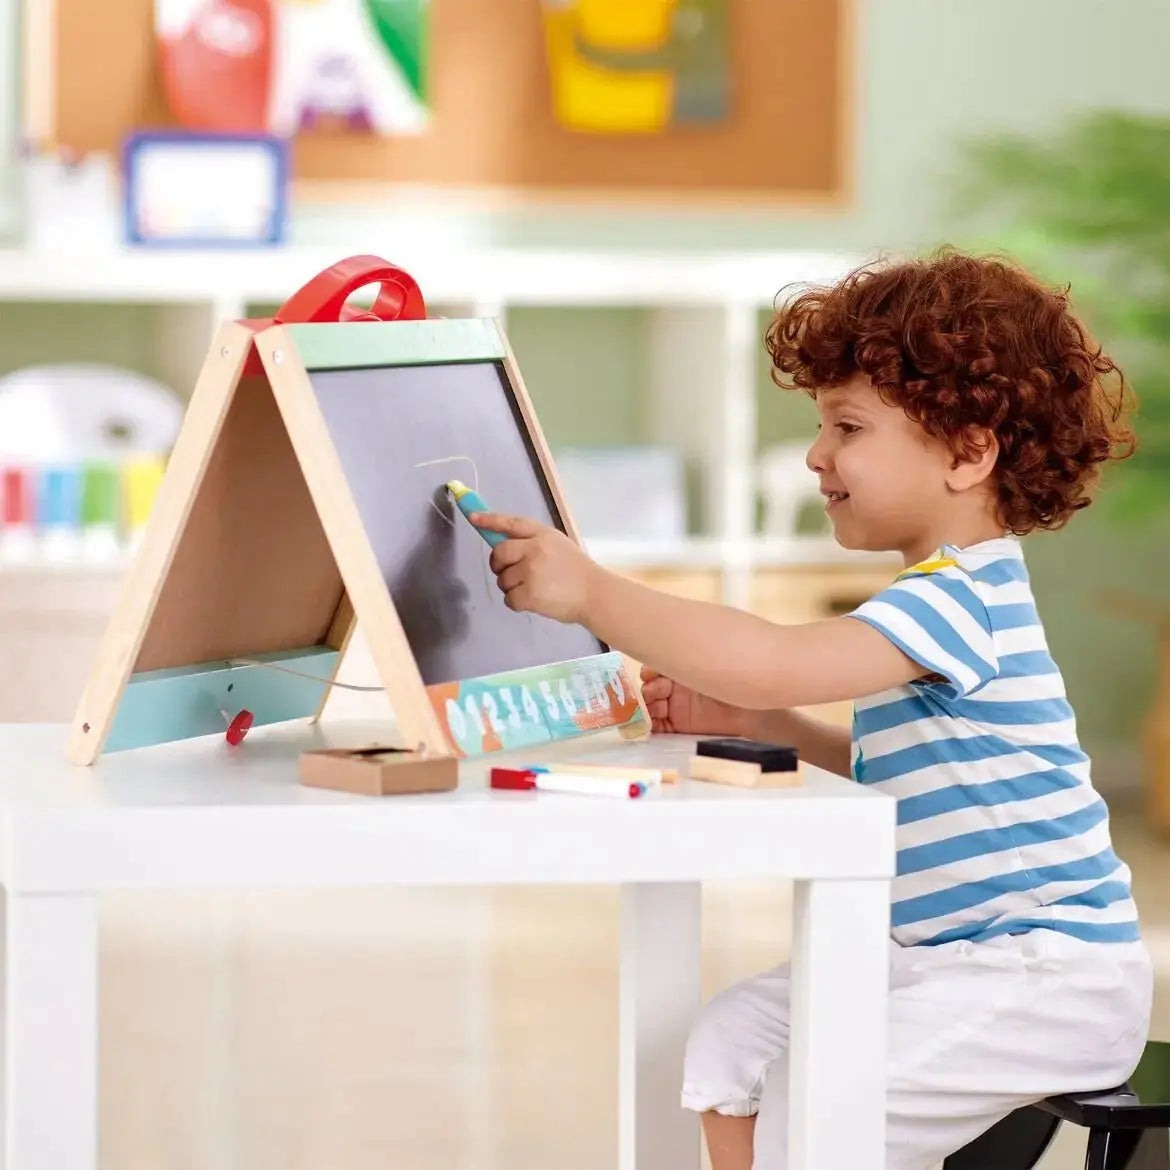 Hape All-in-1 Easel - Kidstop toys and books